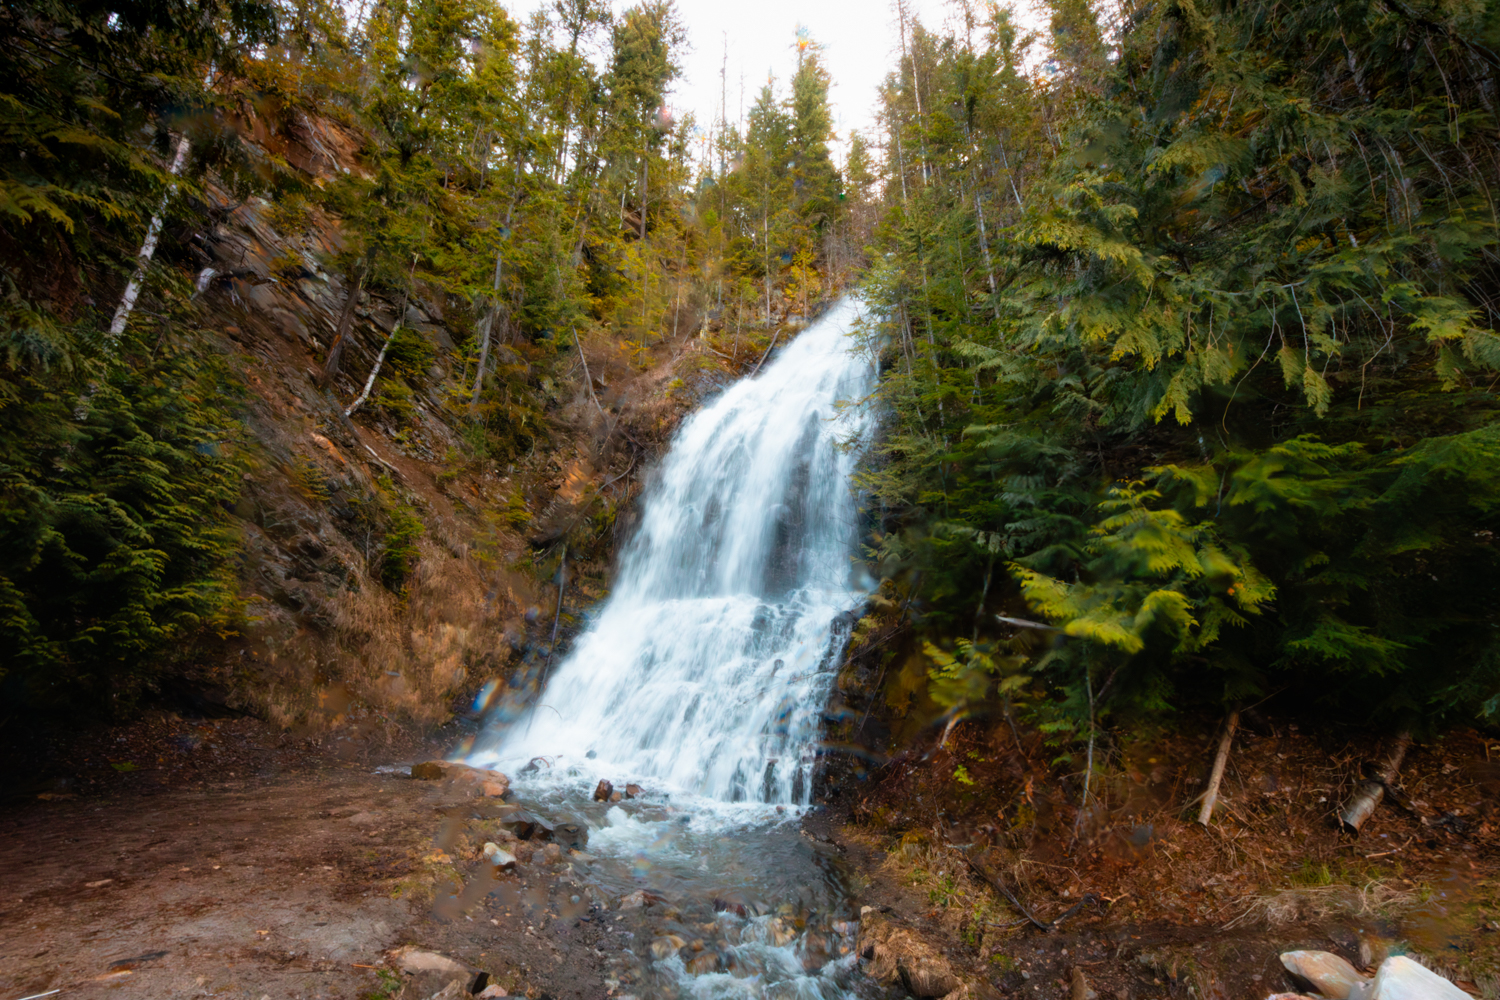 Ione Falls near Nakusp in the West Kootenays, BC